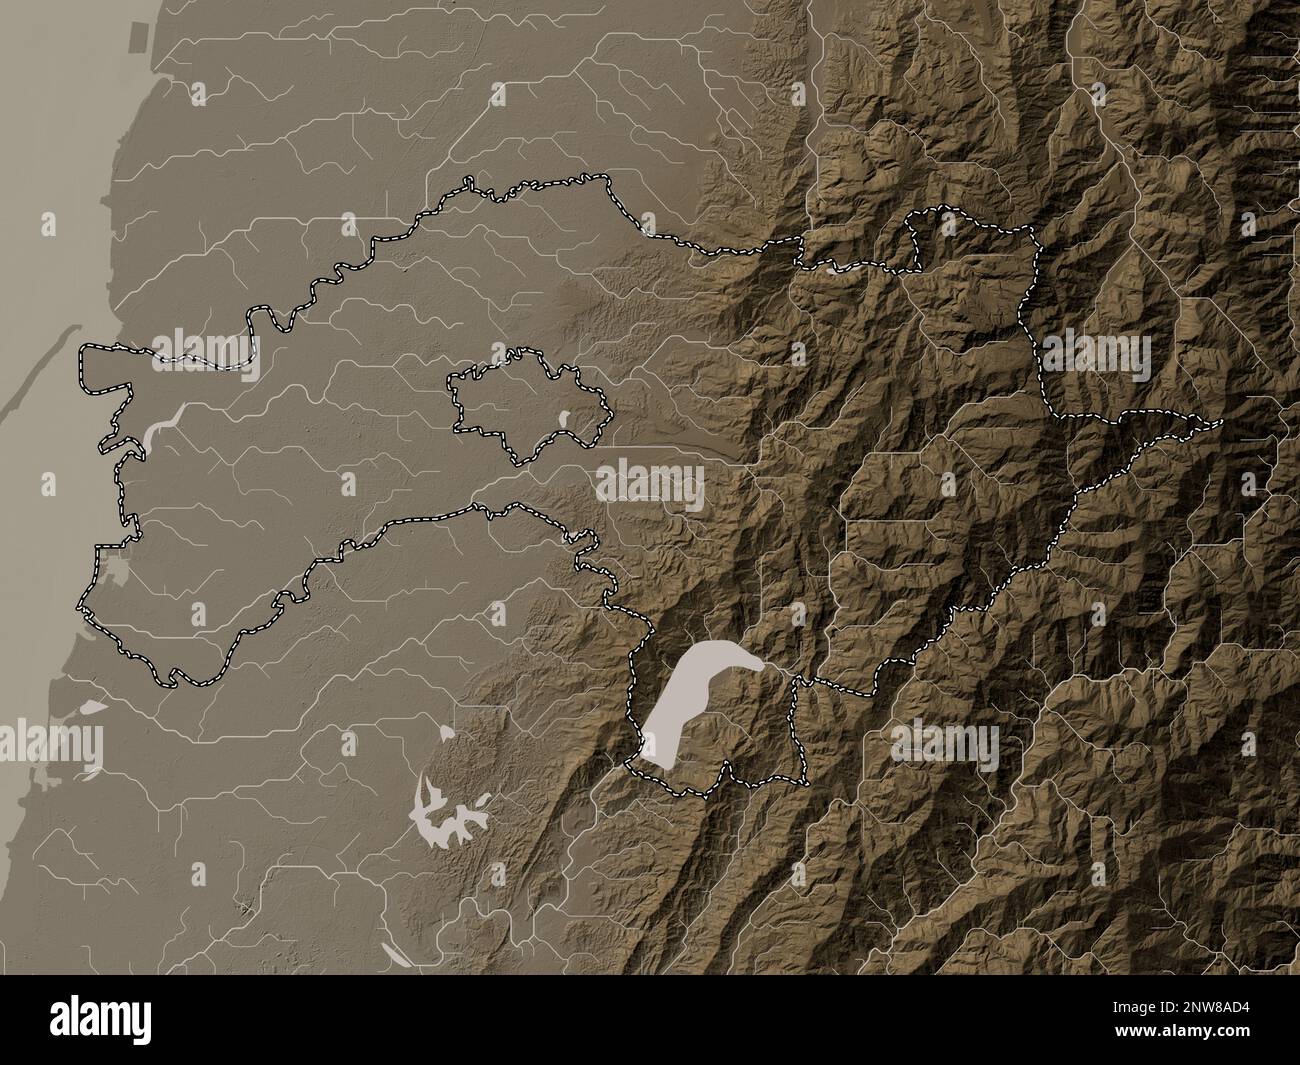 Chiayi, county of Taiwan. Elevation map colored in sepia tones with lakes and rivers Stock Photo